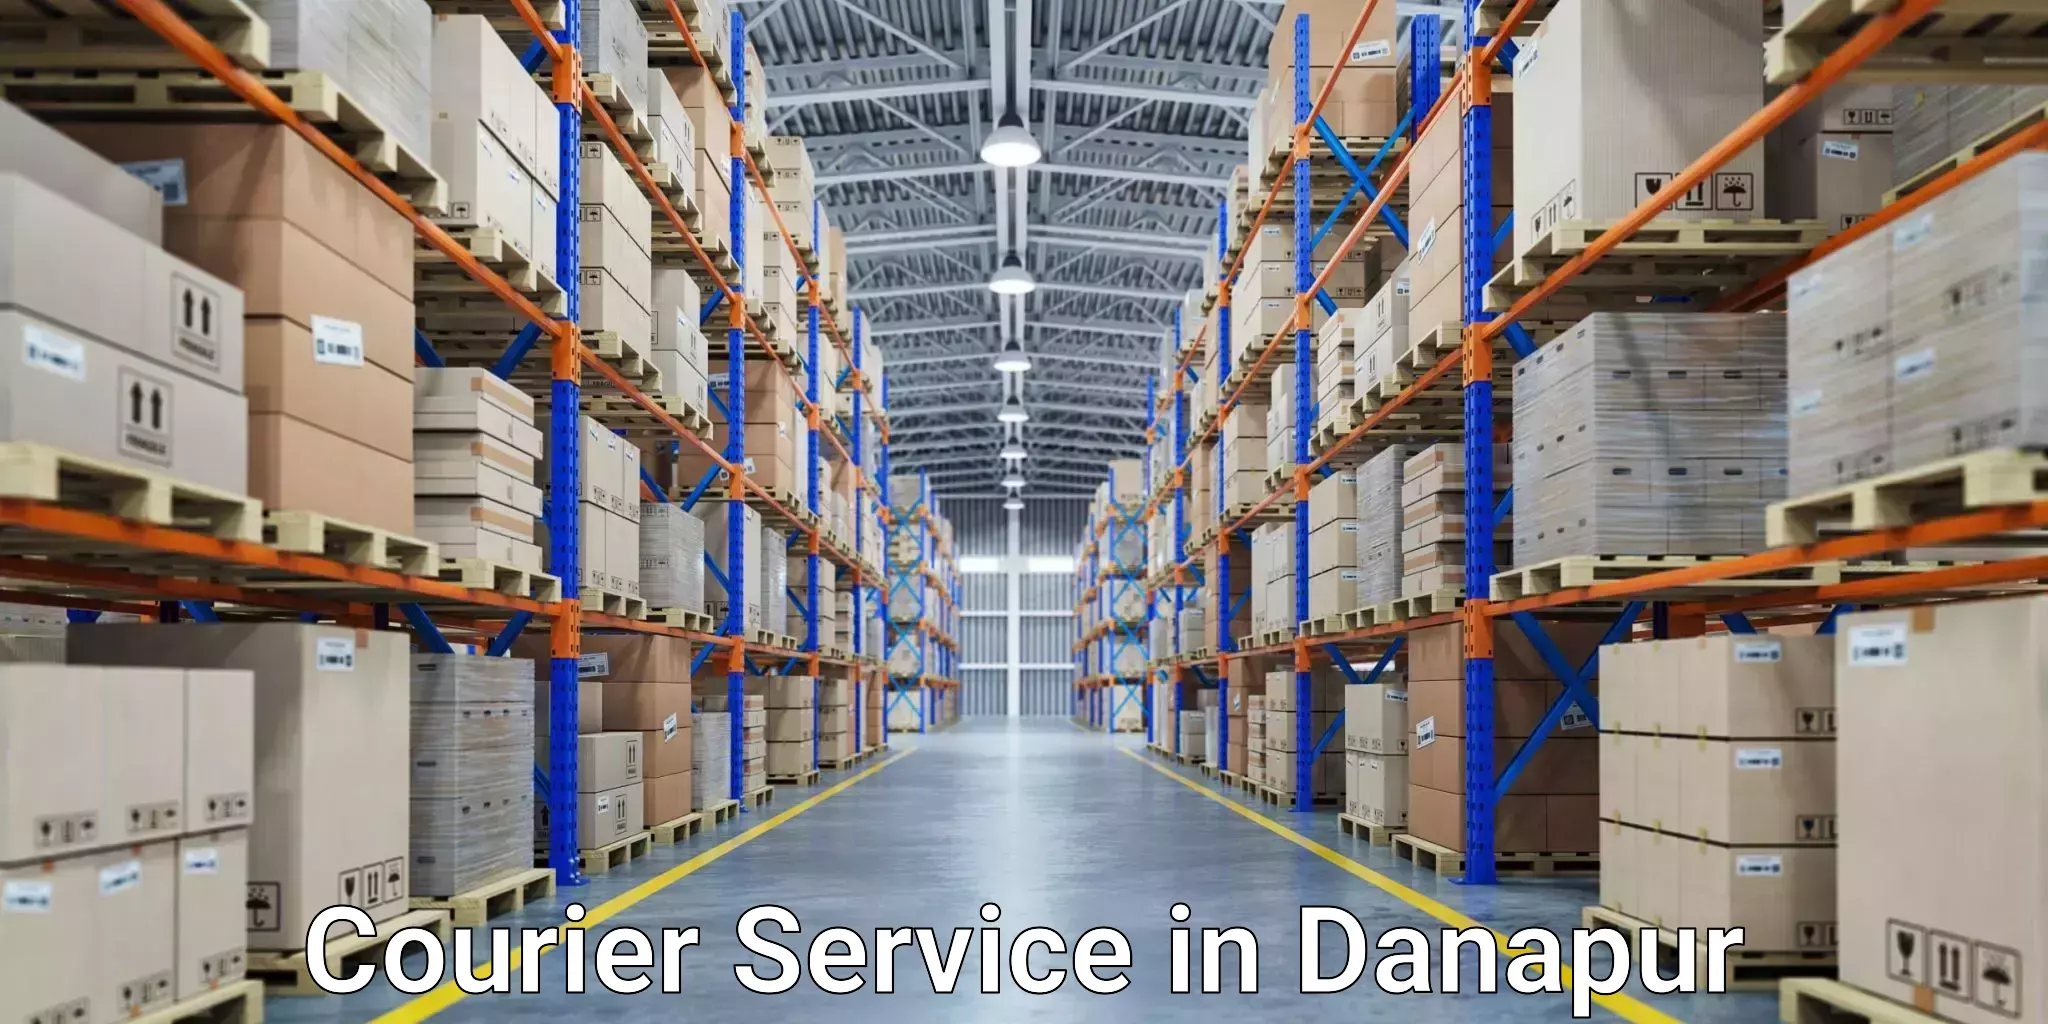 24/7 shipping services in Danapur